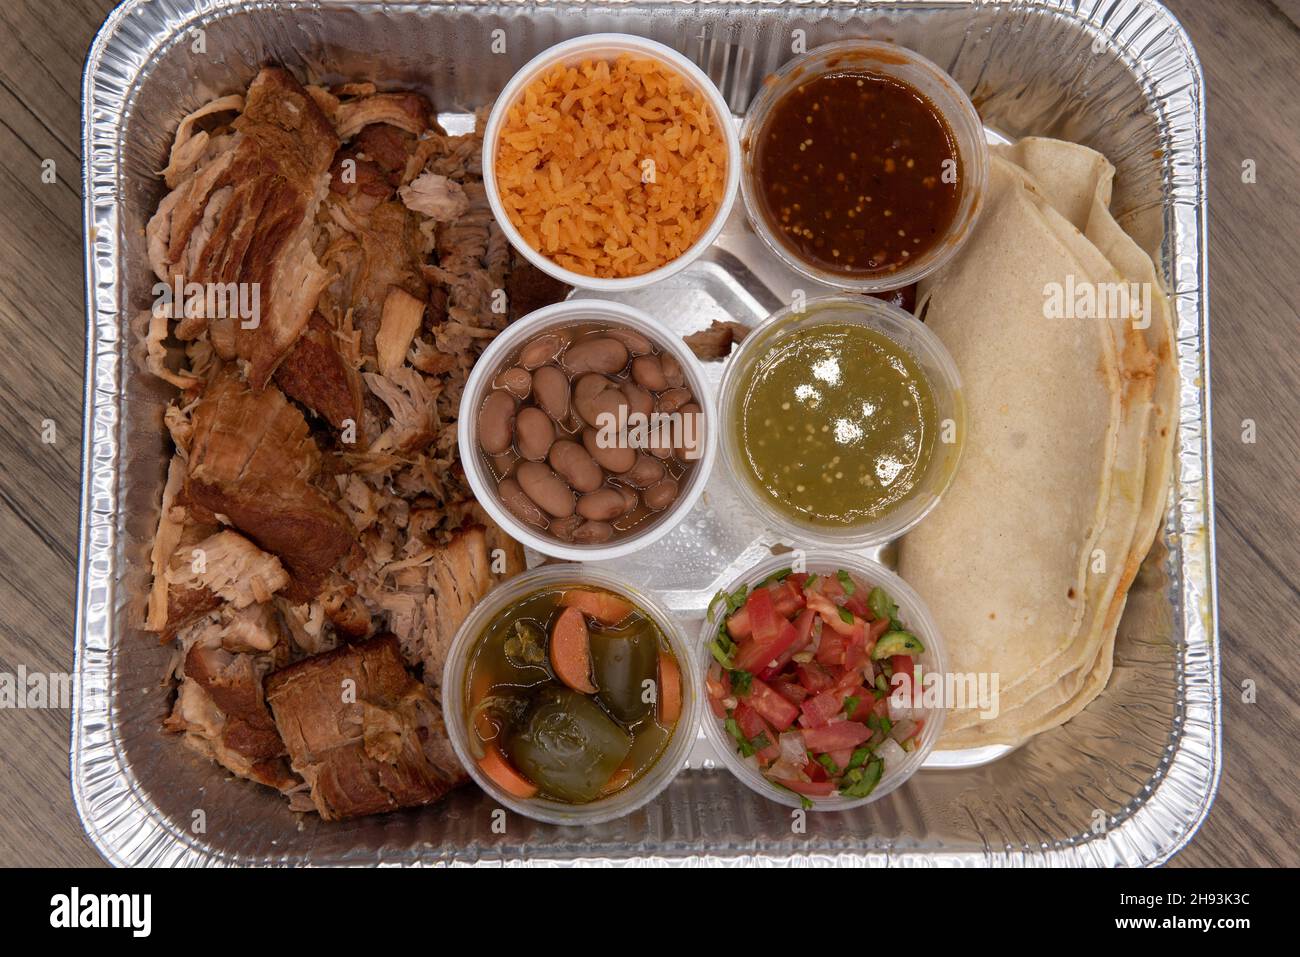 Overhead view of family sized portions of carnitas pork meat with rice, beans, and salsa to have tacos for everyone. Stock Photo